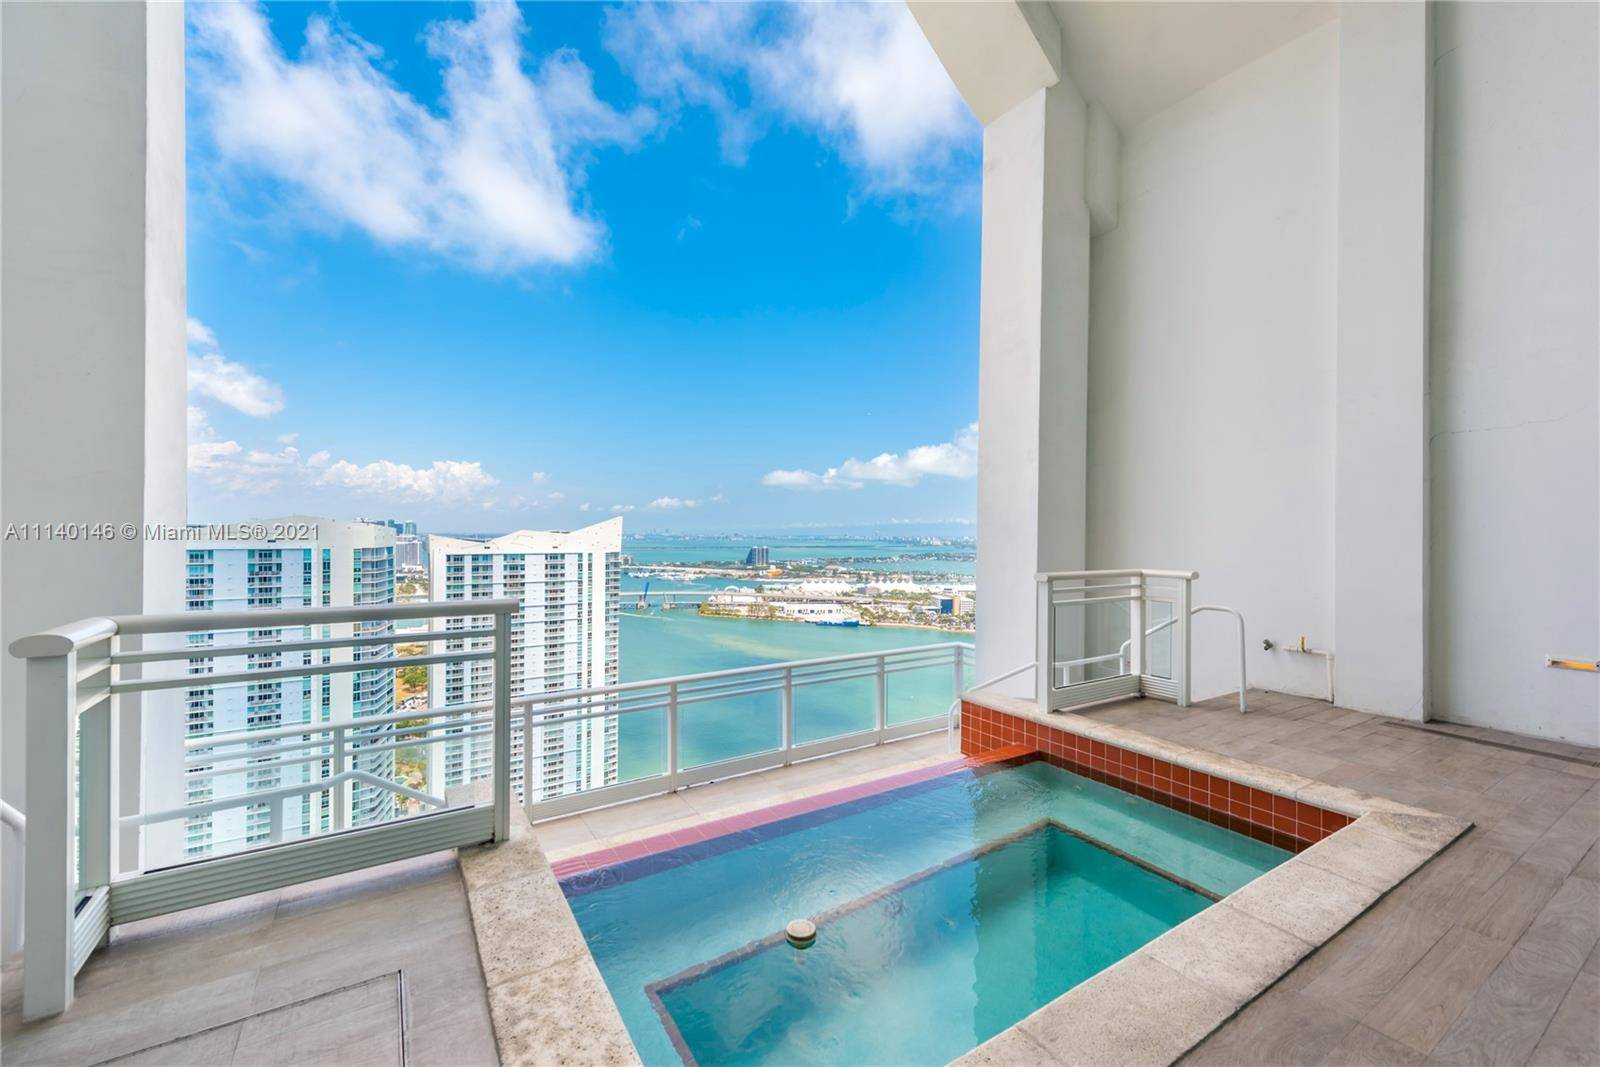 Luxury Penthouse in the newest and most exclusive building in Brickell Key.